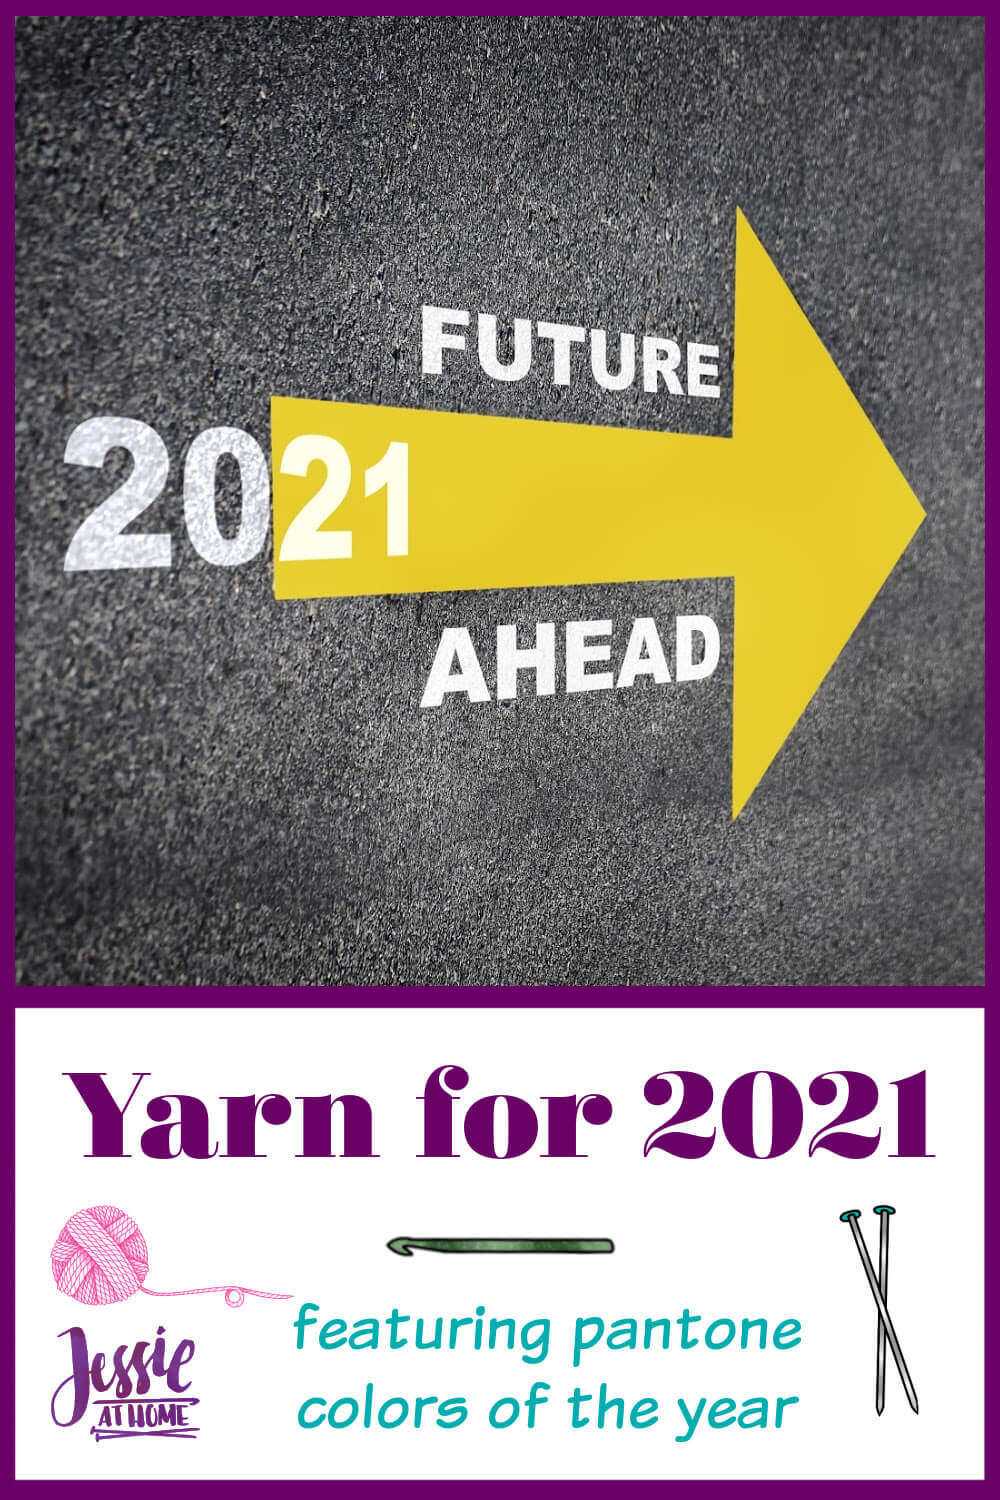 Yarn for 2021 Featuring Pantone Colors of the Year